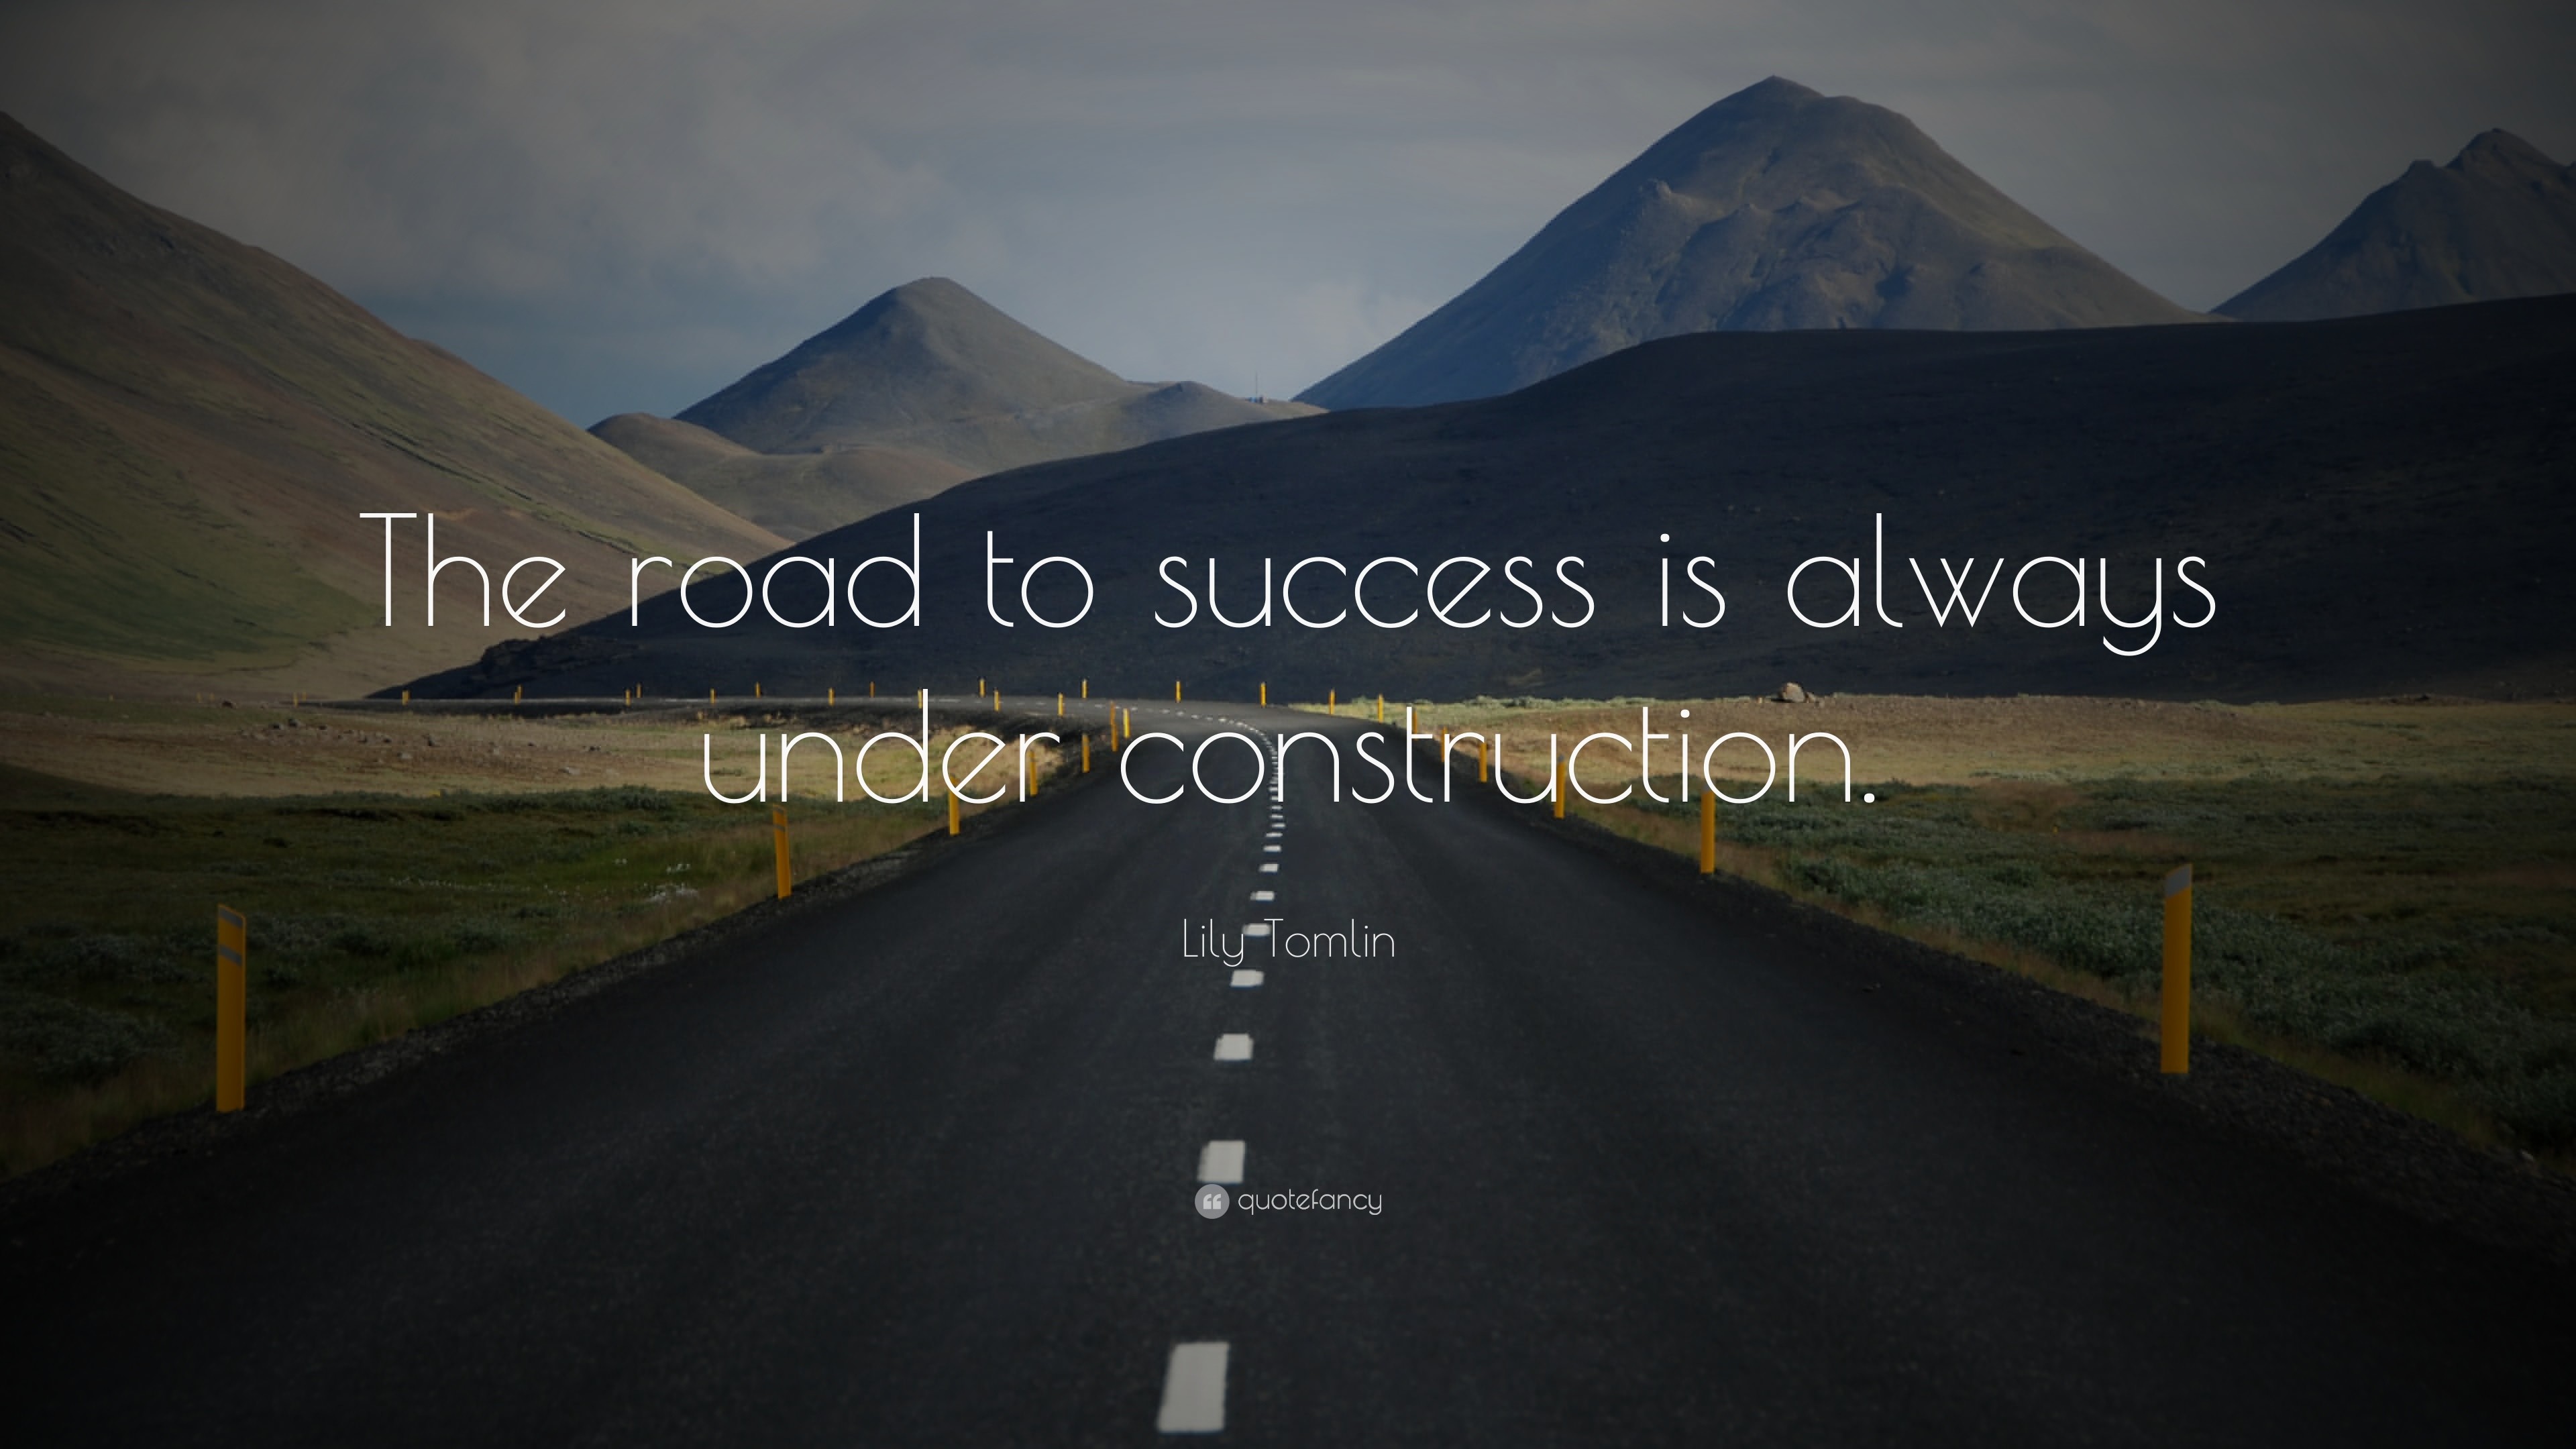 3840x2160 Funny Quotes: “The road to success is always under construction.” — Lily